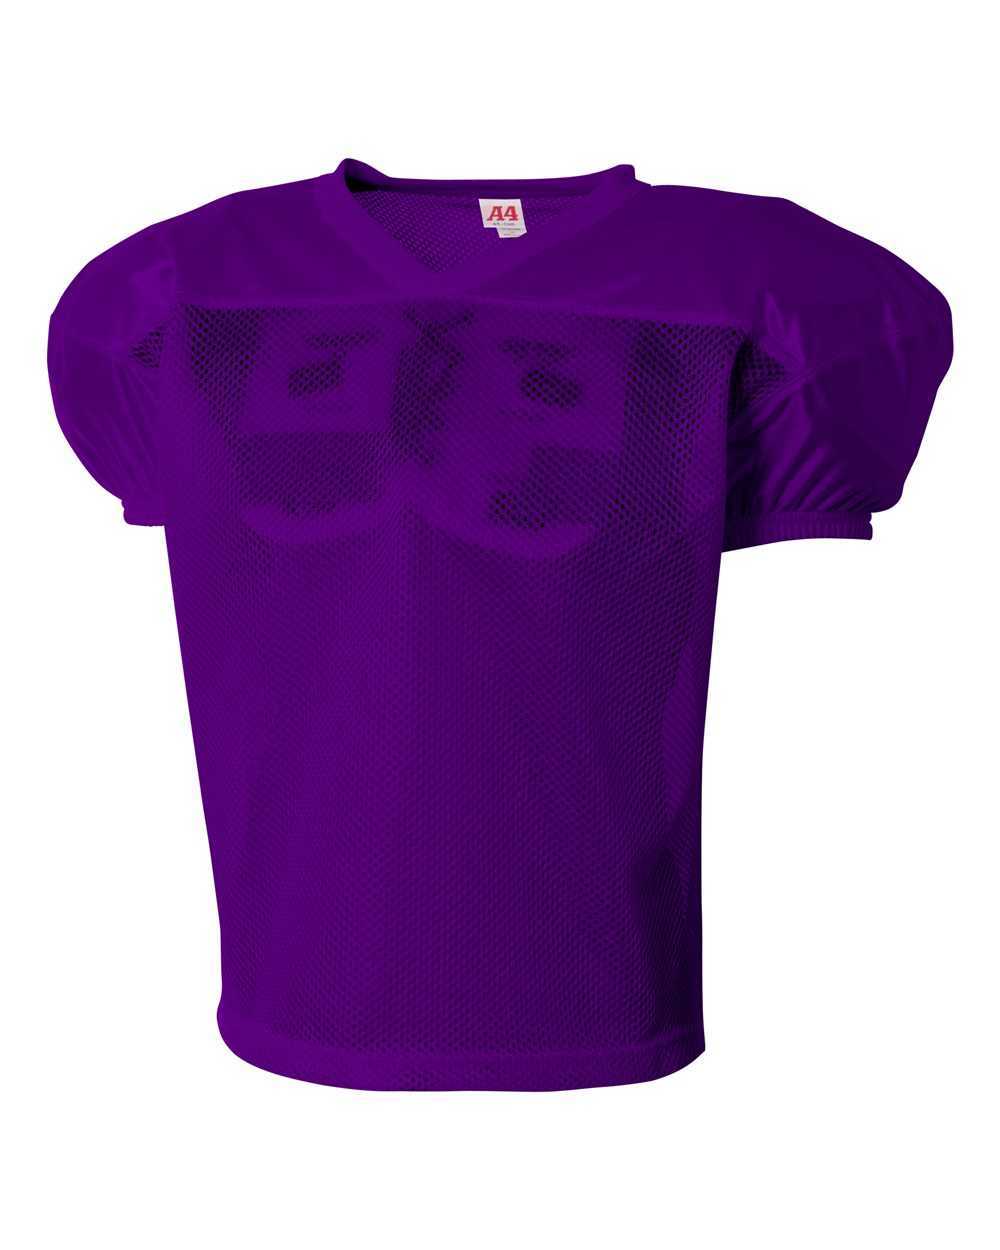  Youth Purple XS Football Poly/Mesh All Porthole Practice Jersey  : Sports & Outdoors